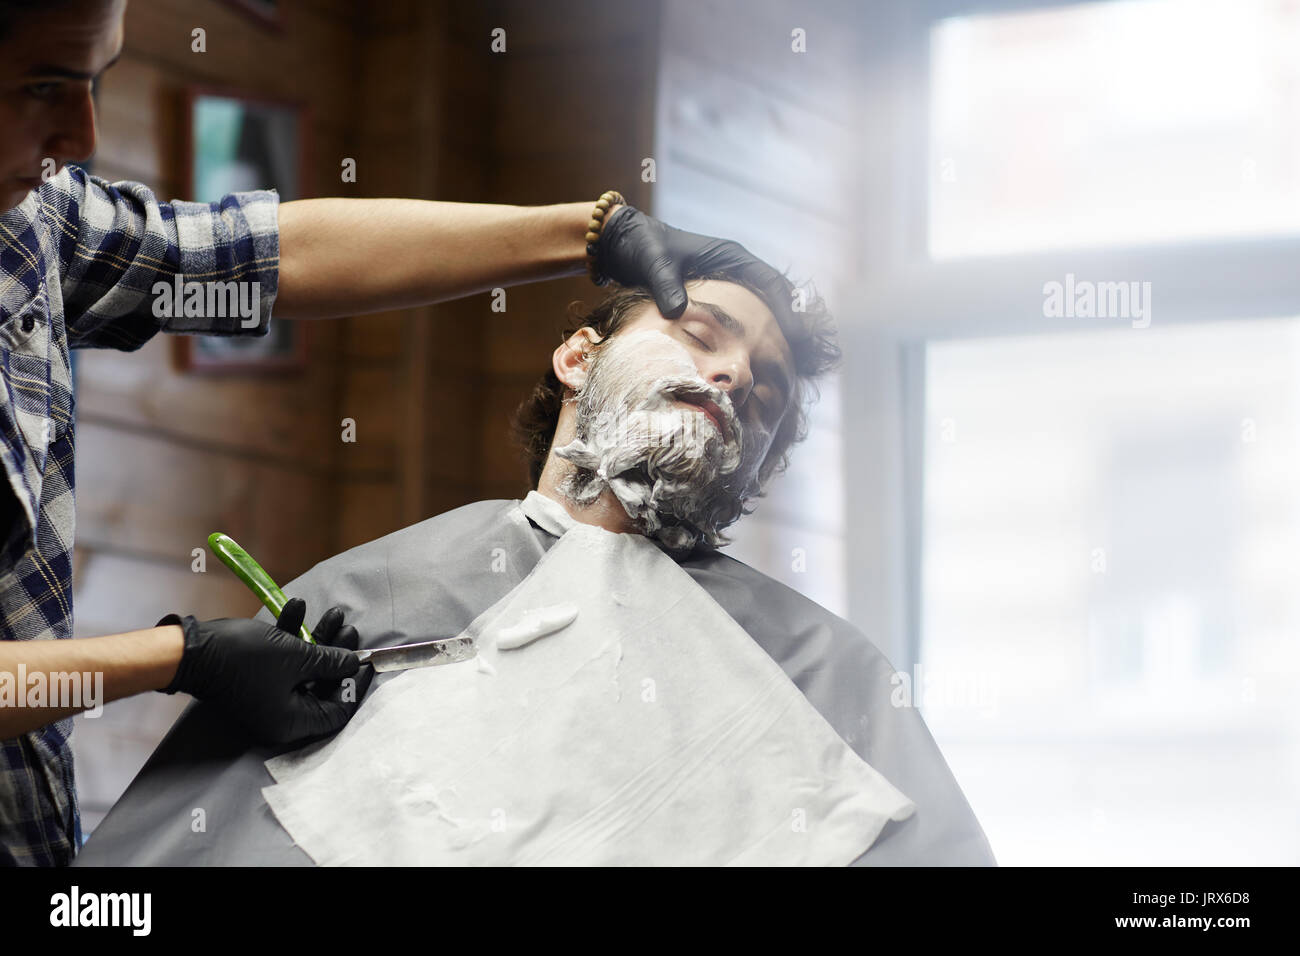 Client of barber Stock Photo